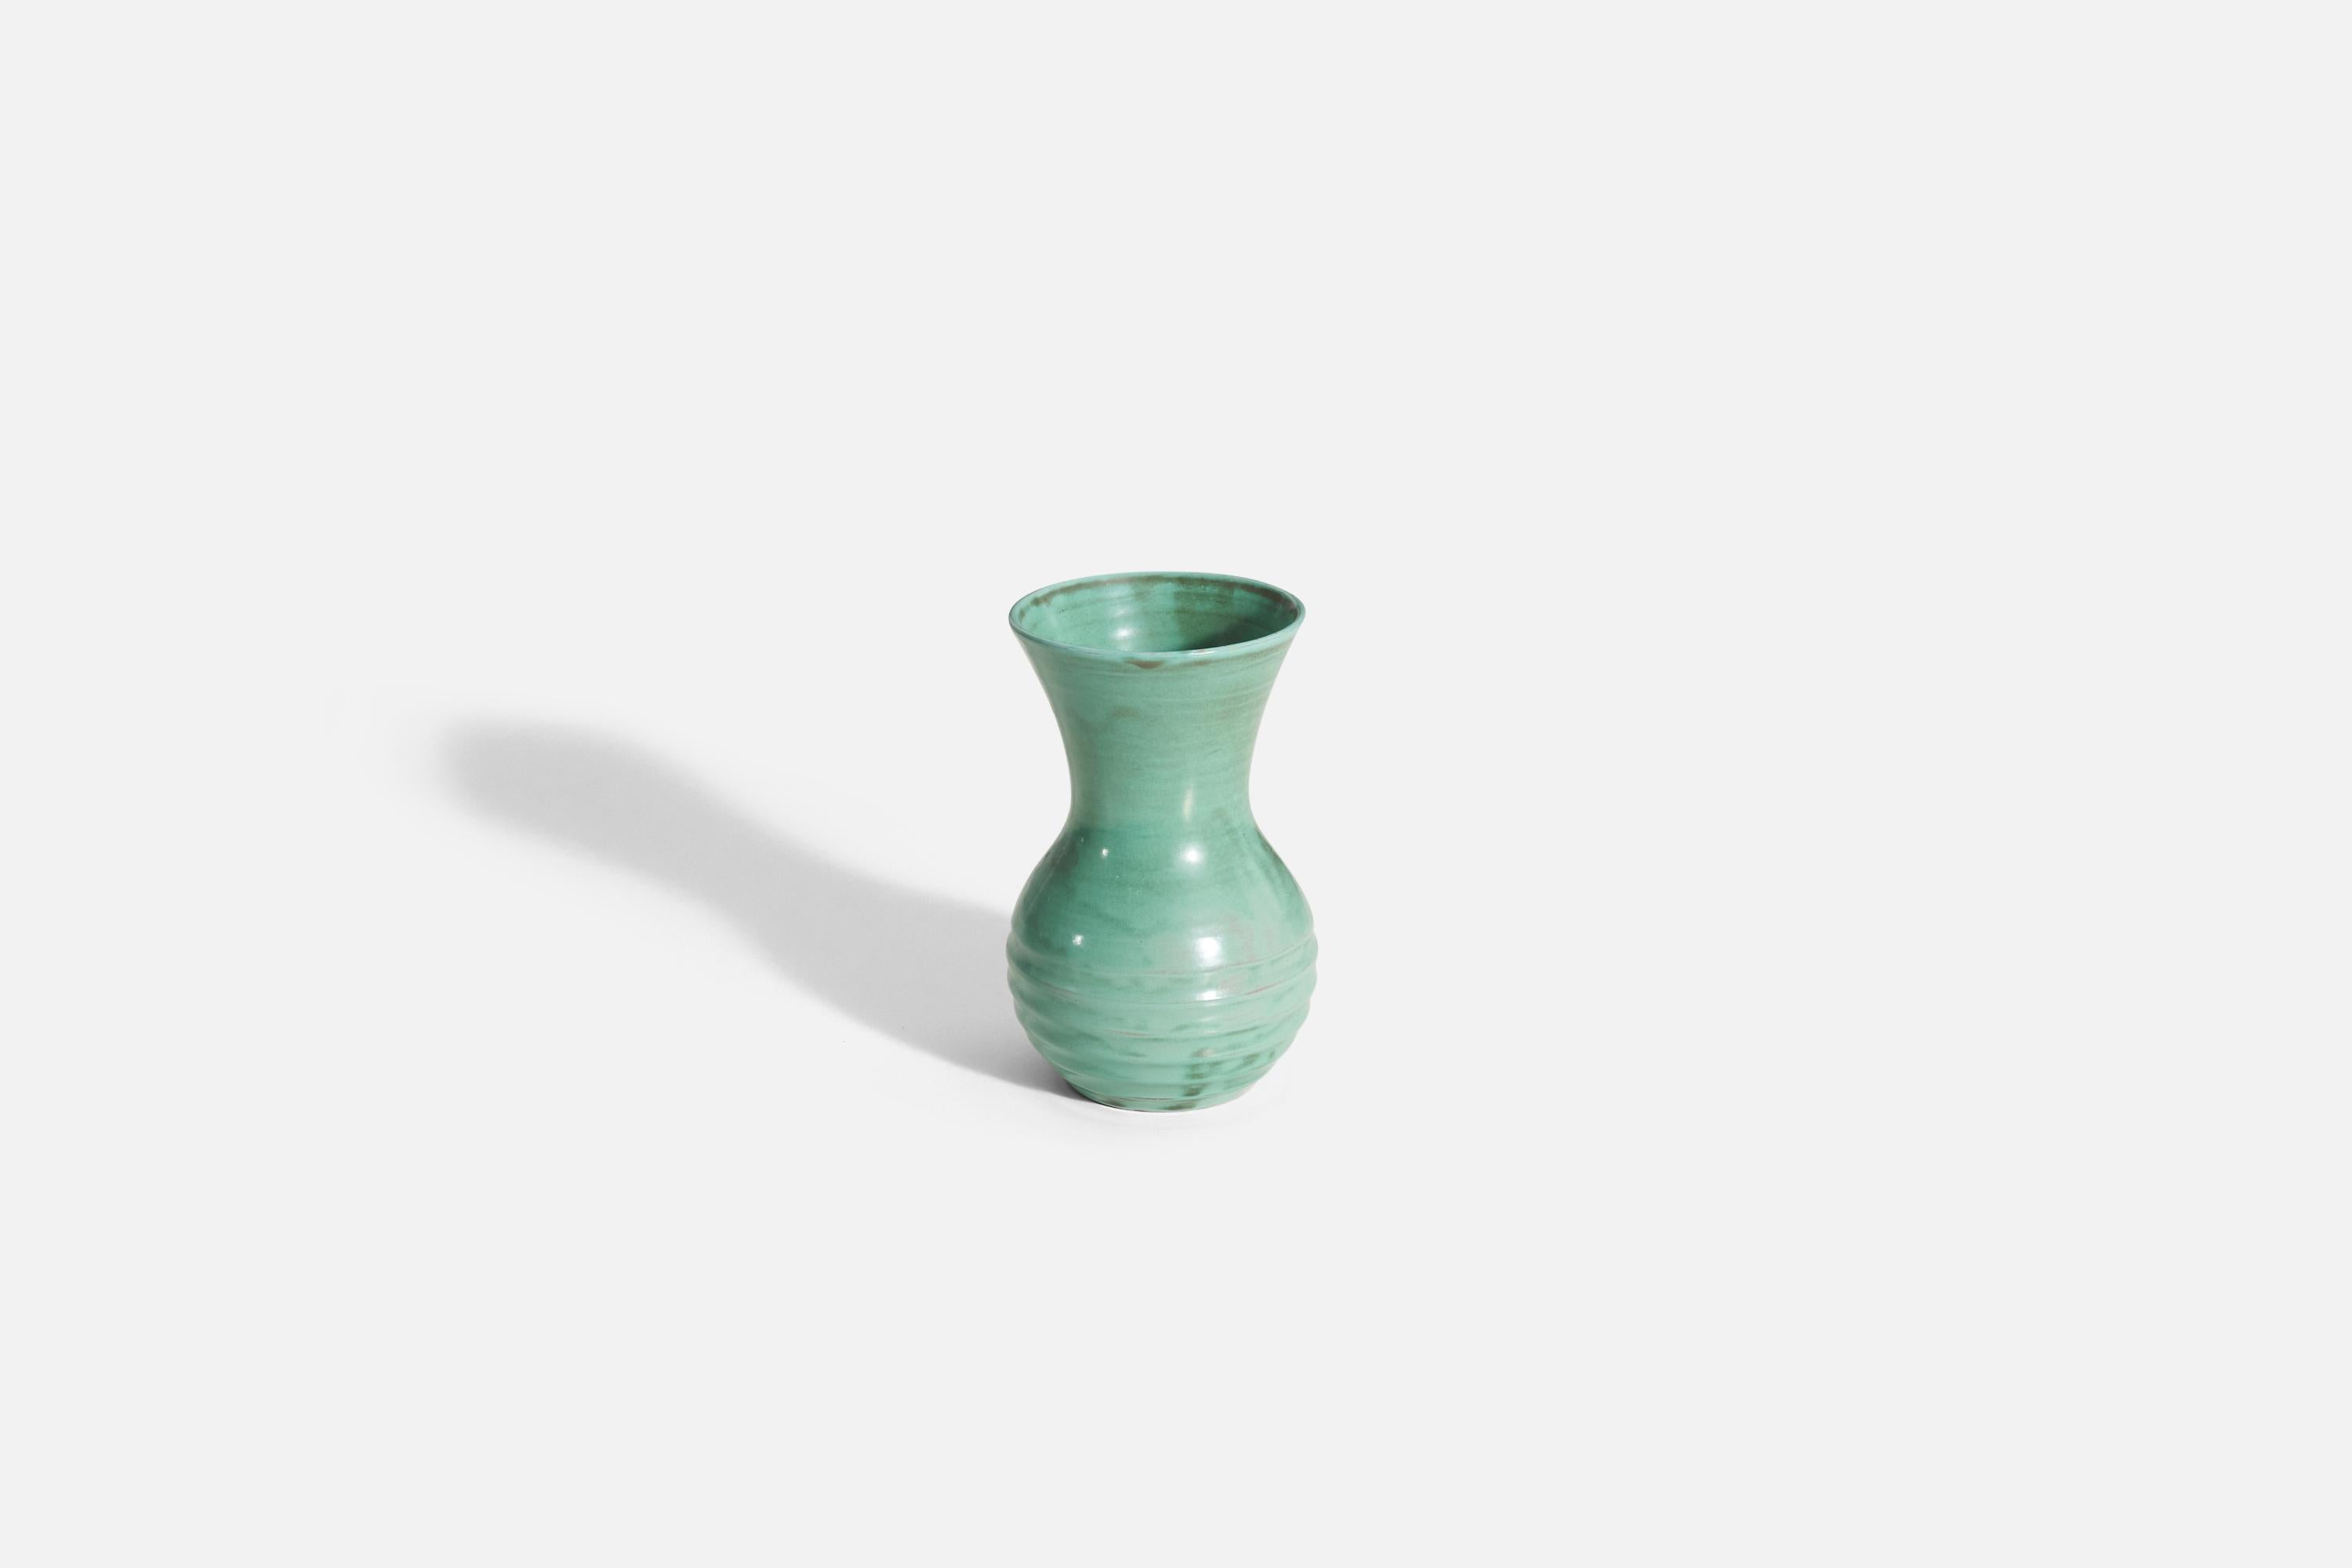 A green glazed earthenware vase produced by Upsala-Ekeby, Sweden, 1940s. 

Other designers of the period include Ettore Sottsass, Carl Harry Stålhane, Lisa Larsson, Axel Salto, and Arne Bang.